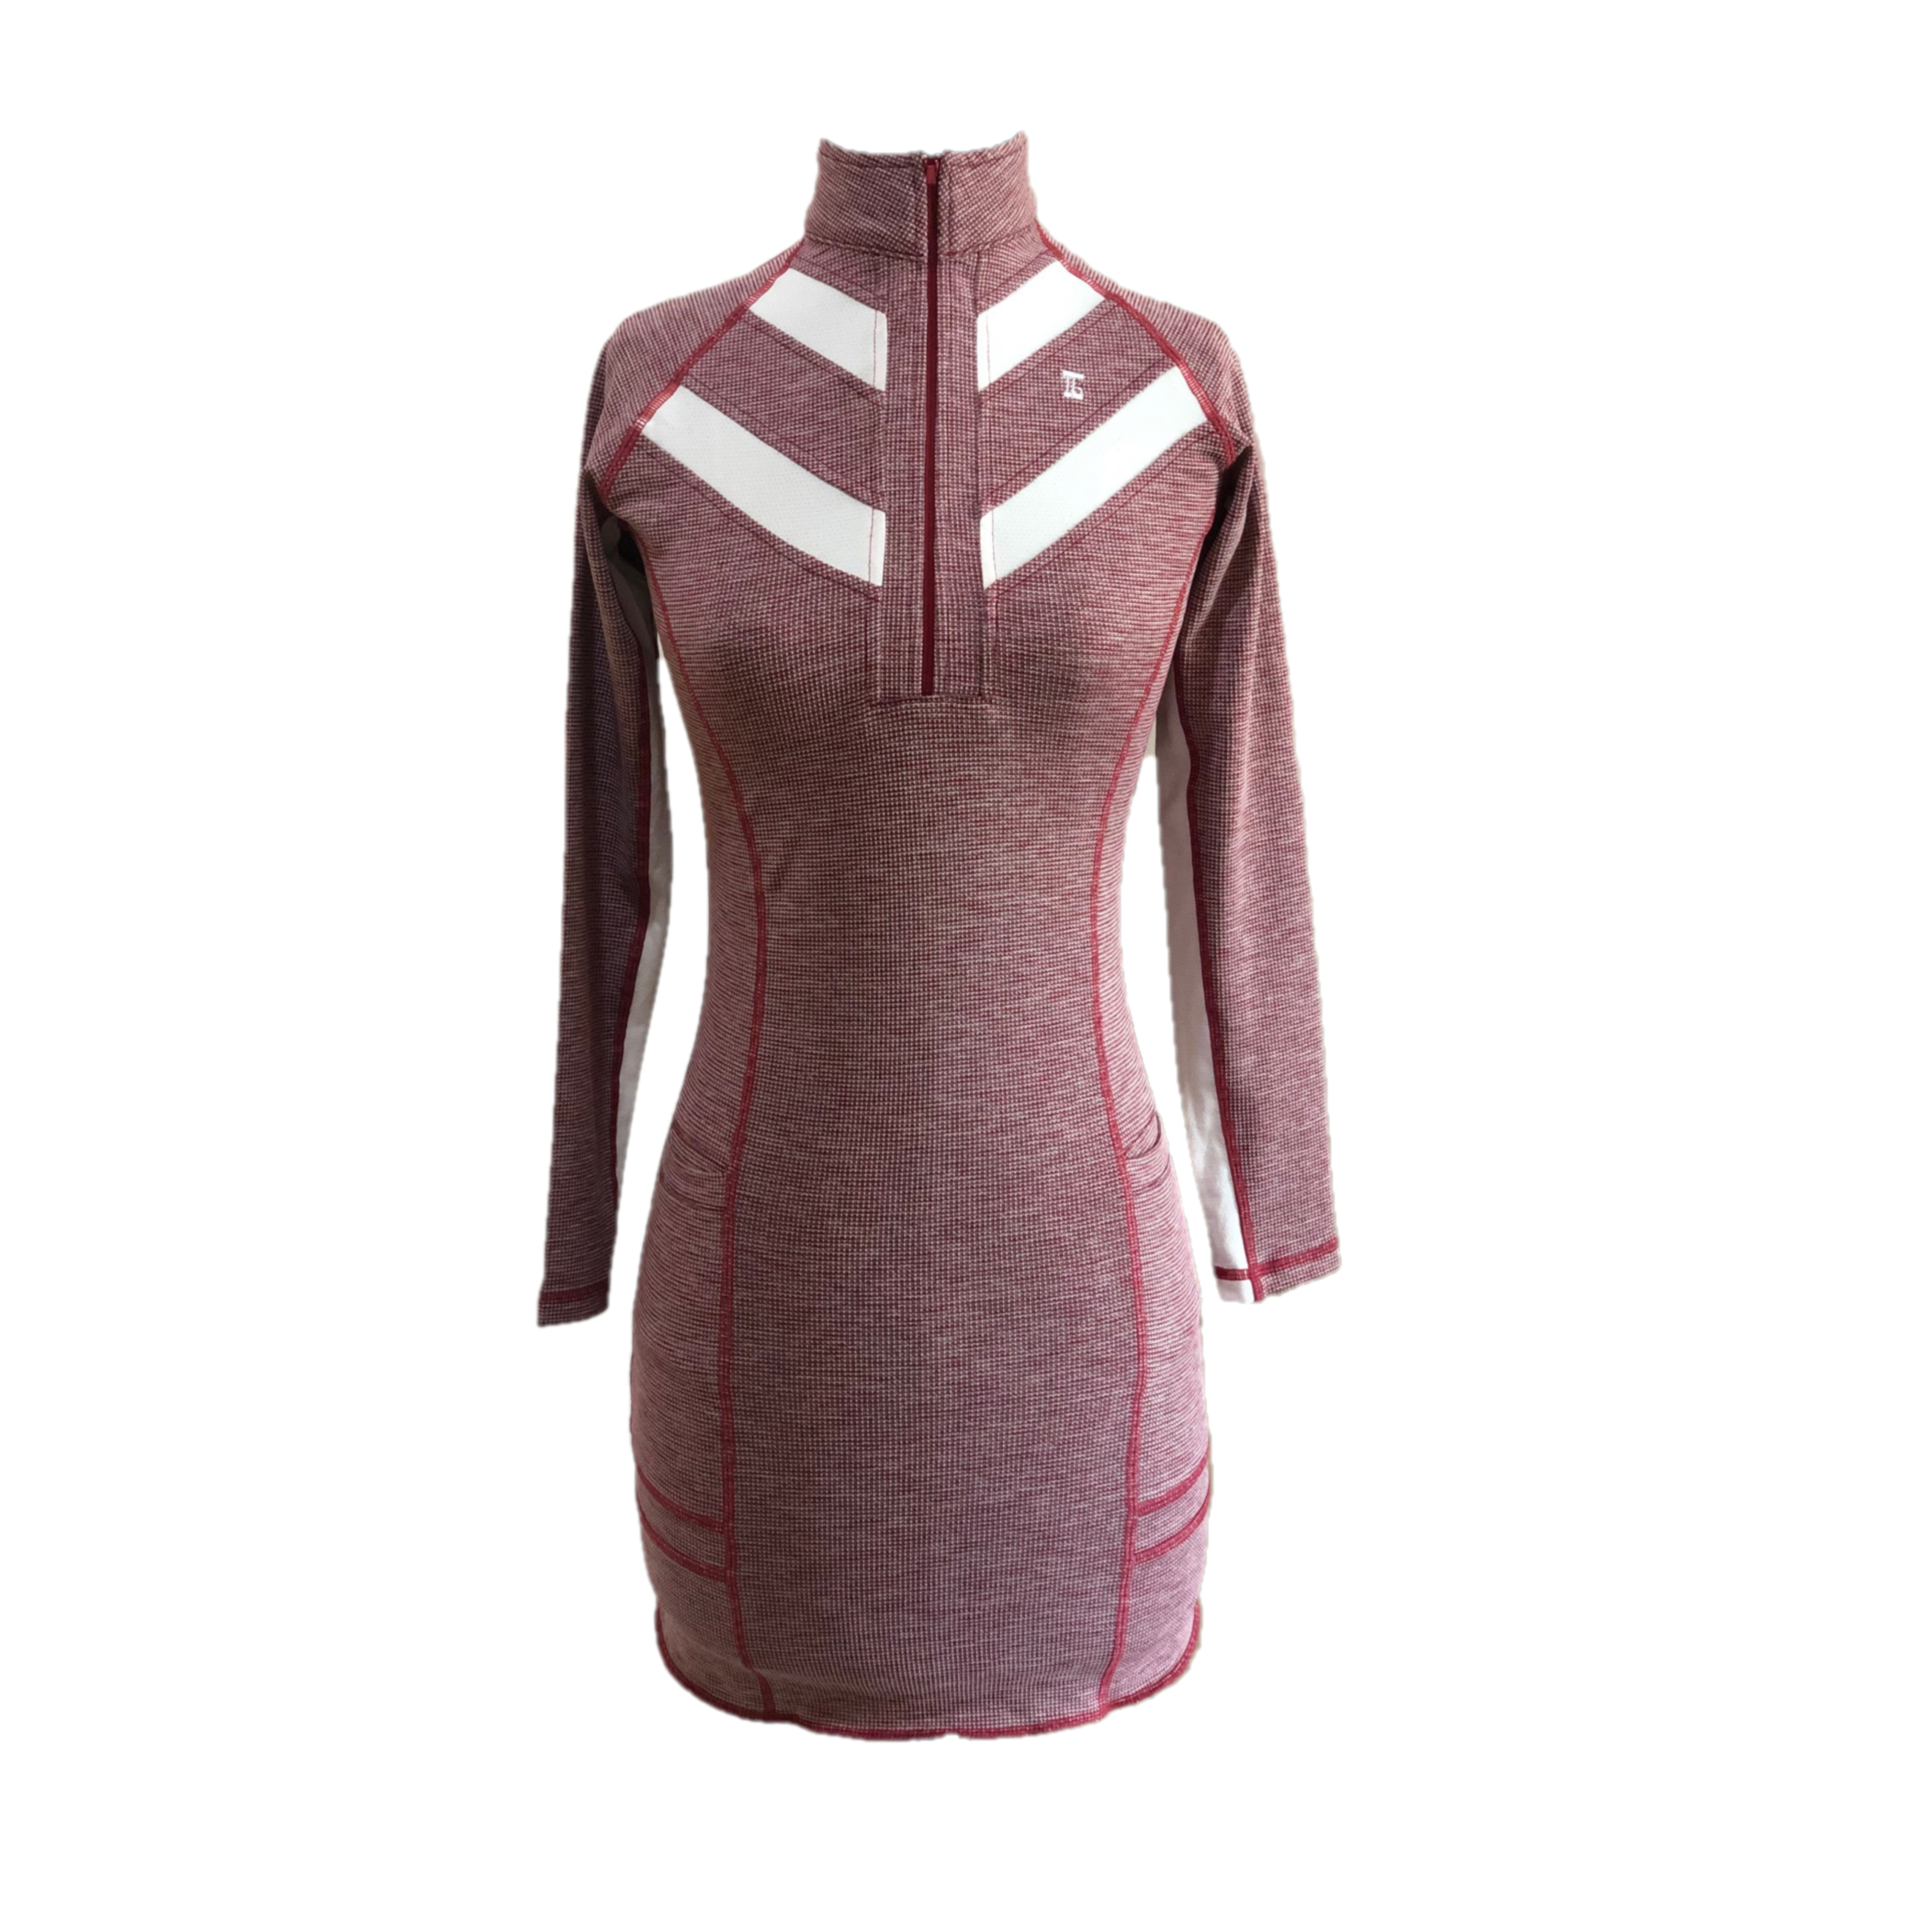 GD-019 || Golf Dress Long Sleeved Maroon Marble and White Tweed Featured Over Locked Seems with Double Hem Overlocking Textured Fabric, Wide Back Chevron Stripes 2 Each Side of Front Collar, Zip Mock Polo Neck, 2 Front Pockets with White Trim